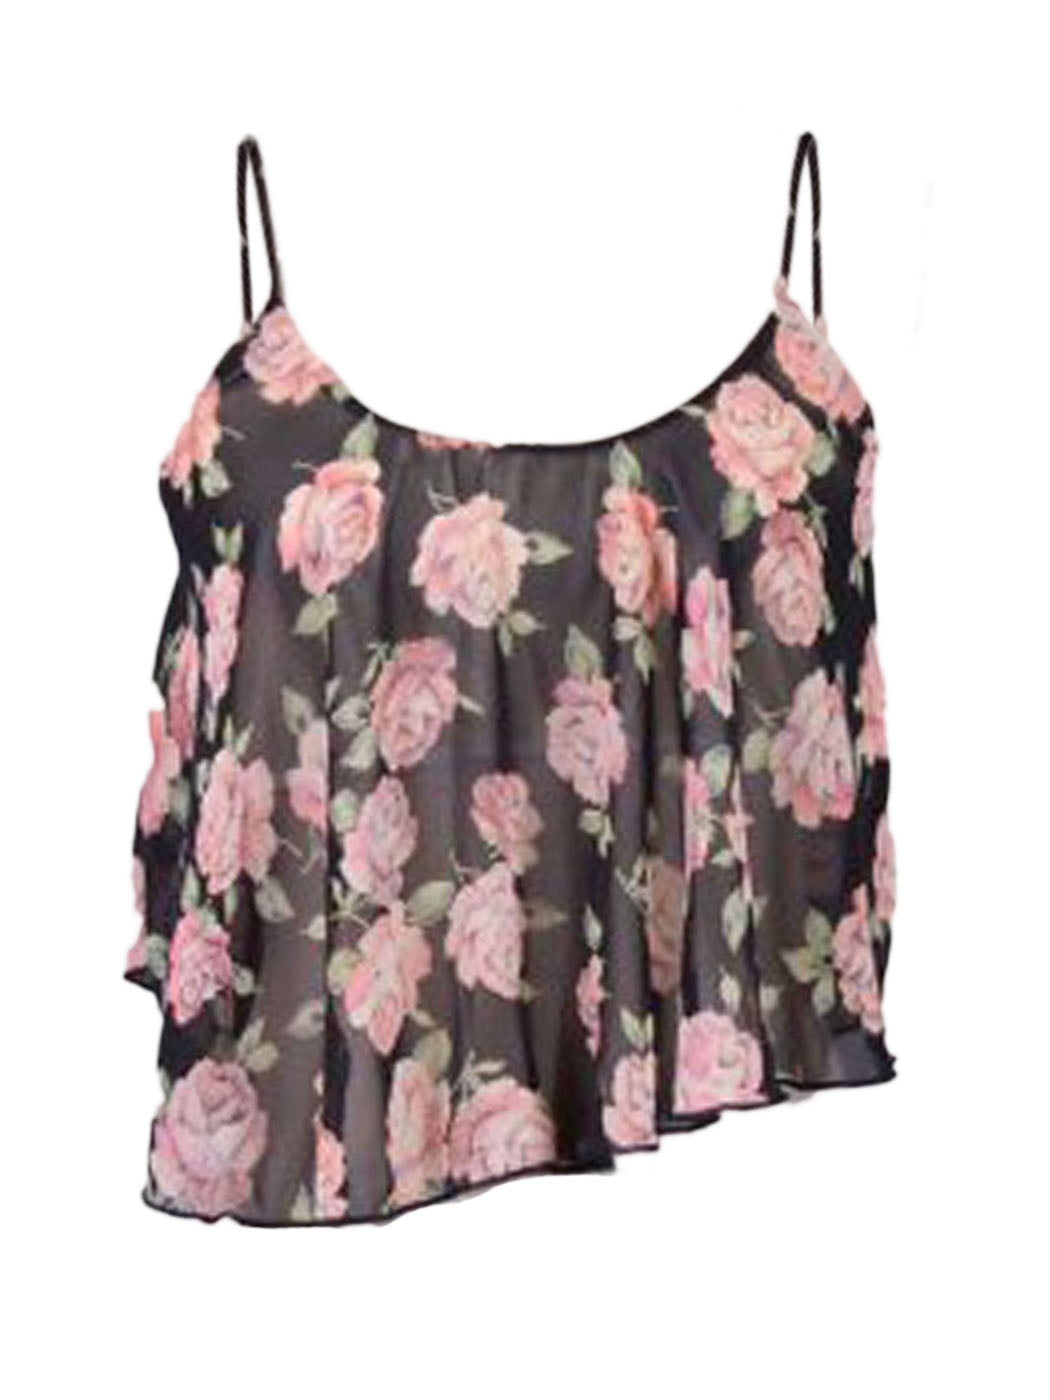 Audrey 3+1 Sweet Vintage Inspired Spring Floral Chiffon Ruffle Tank Top